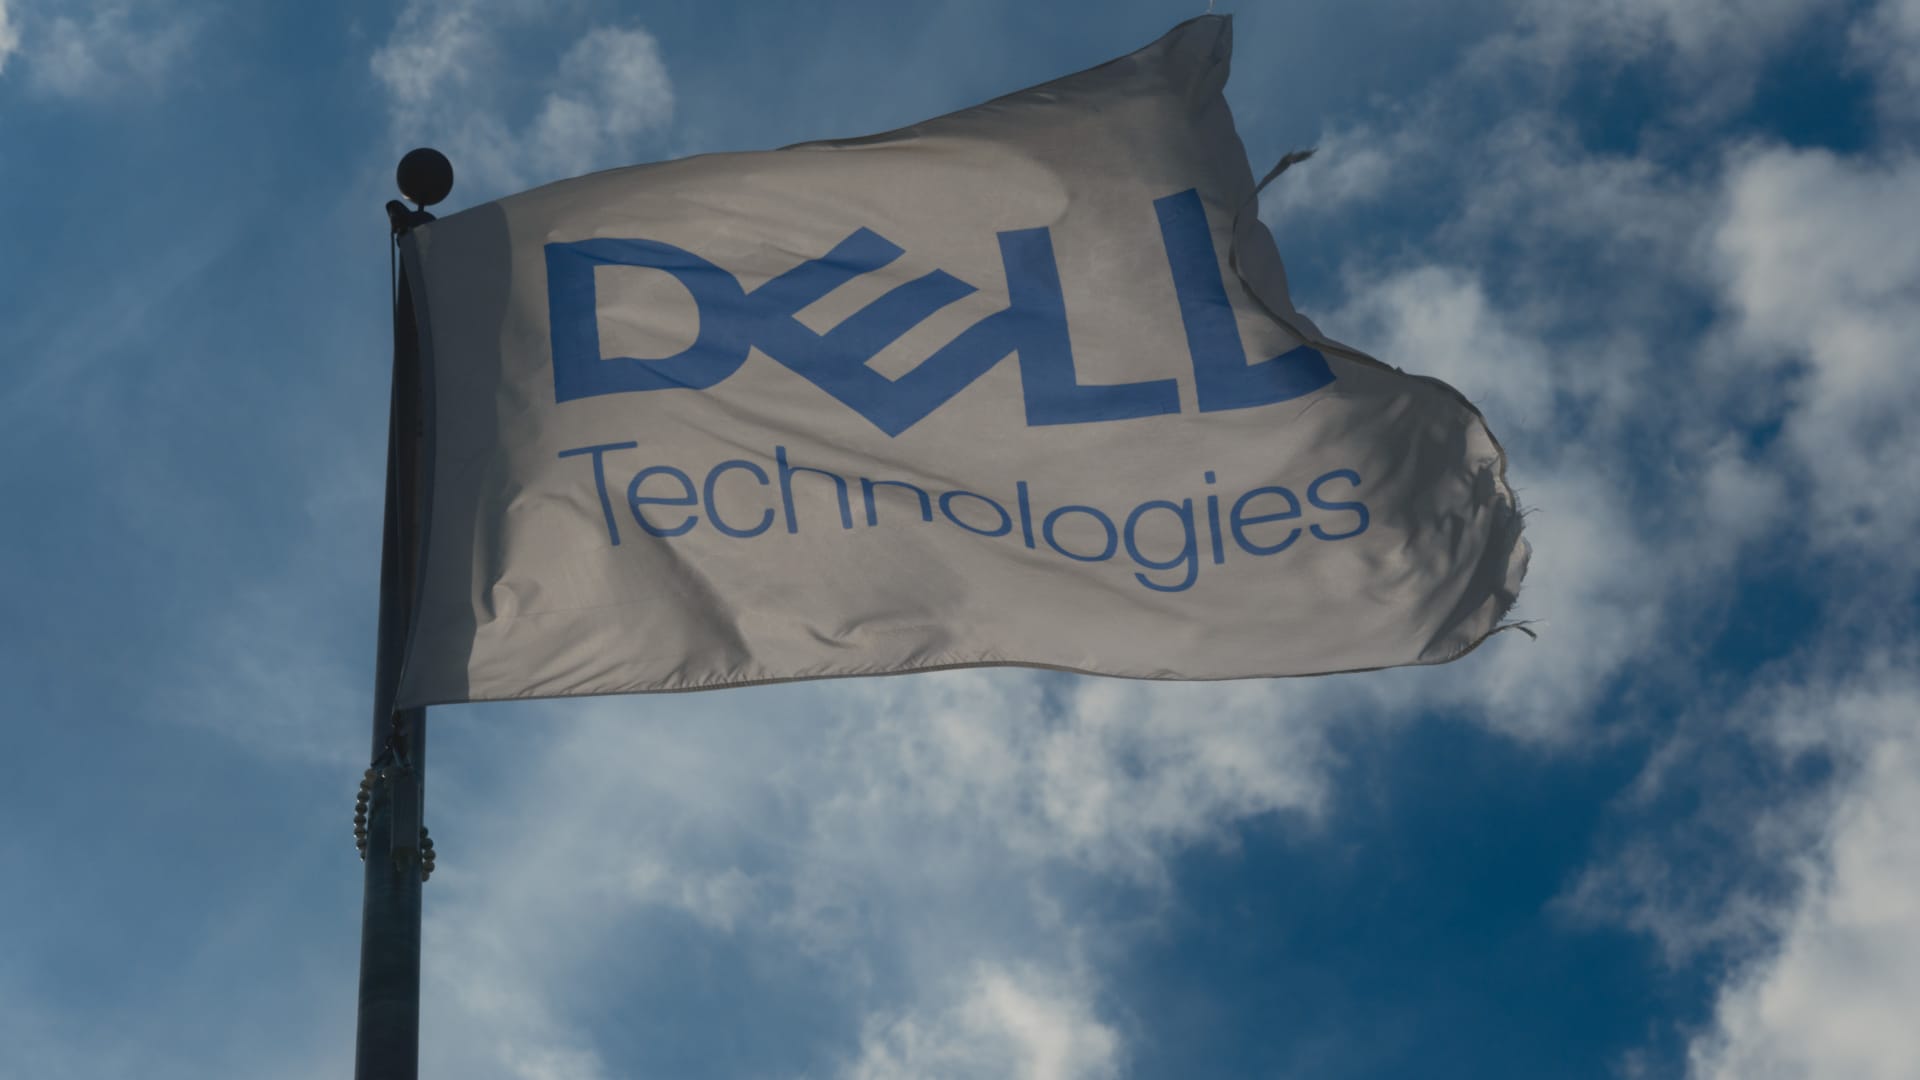 Stocks making the biggest moves after hours: Dell Technologies, MongoDB, Zscaler, Gap and more